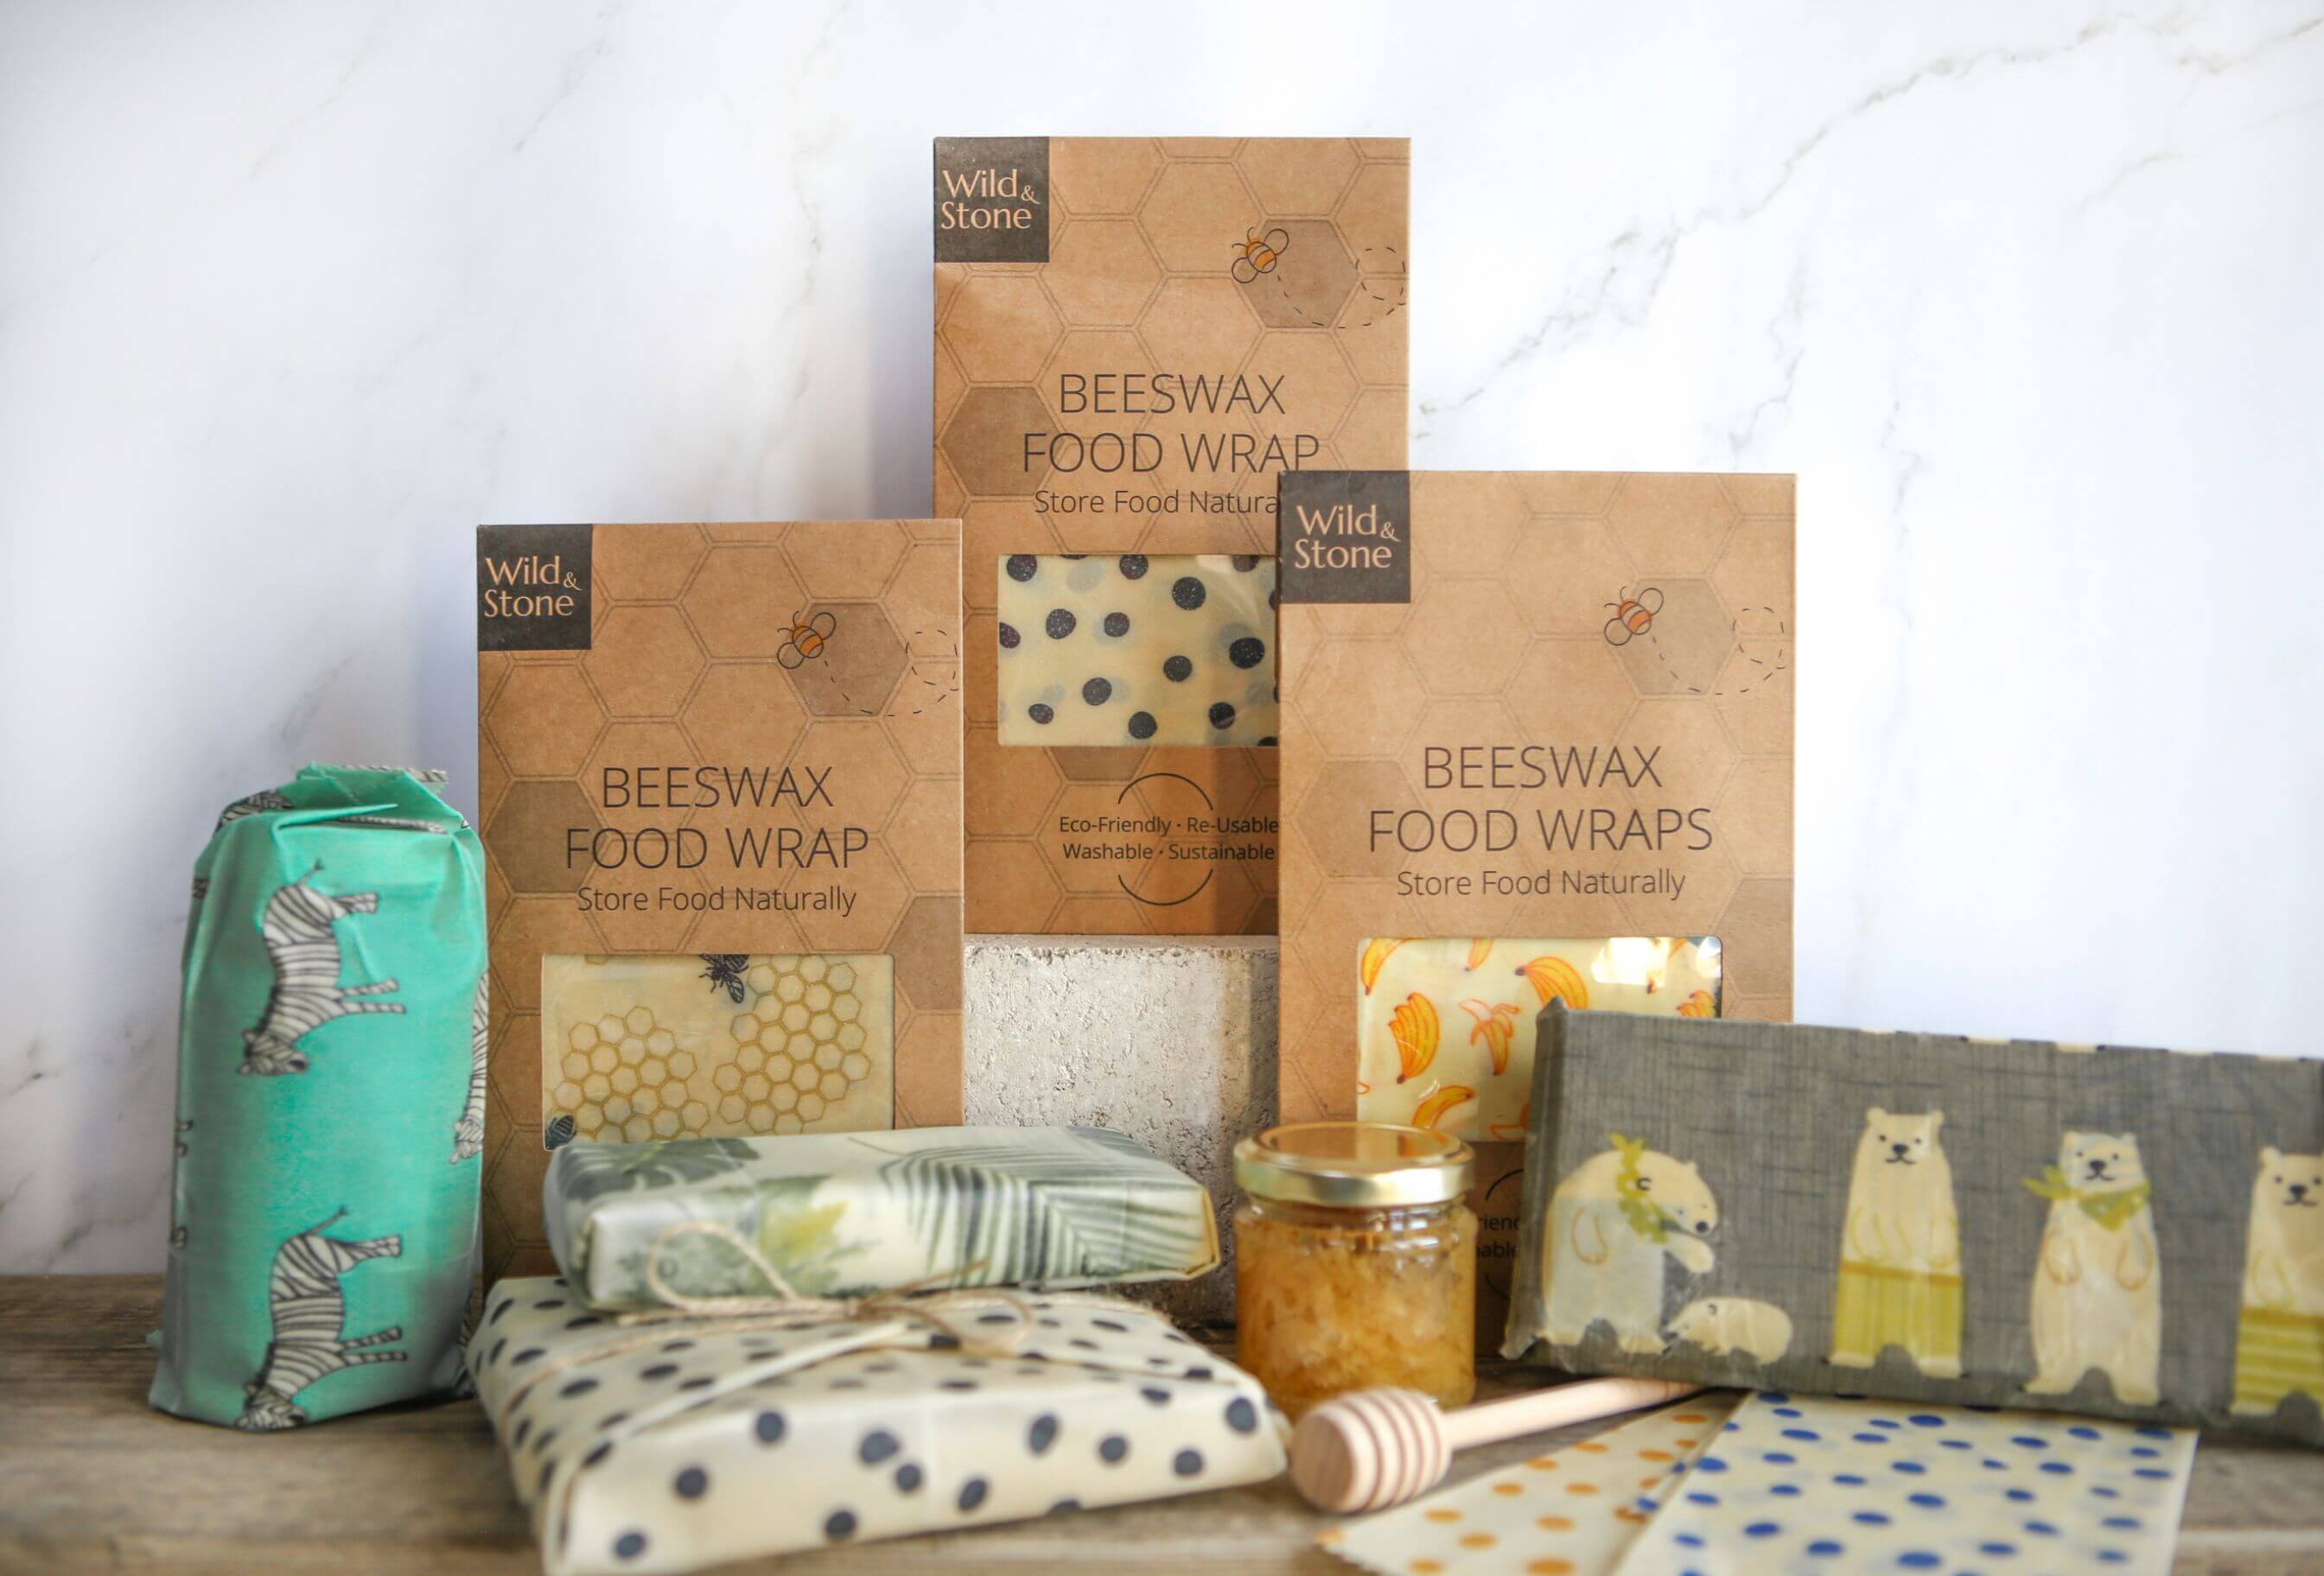 Honeycomb patterned beeswax wraps in a cardboard package sitting on a marble background.